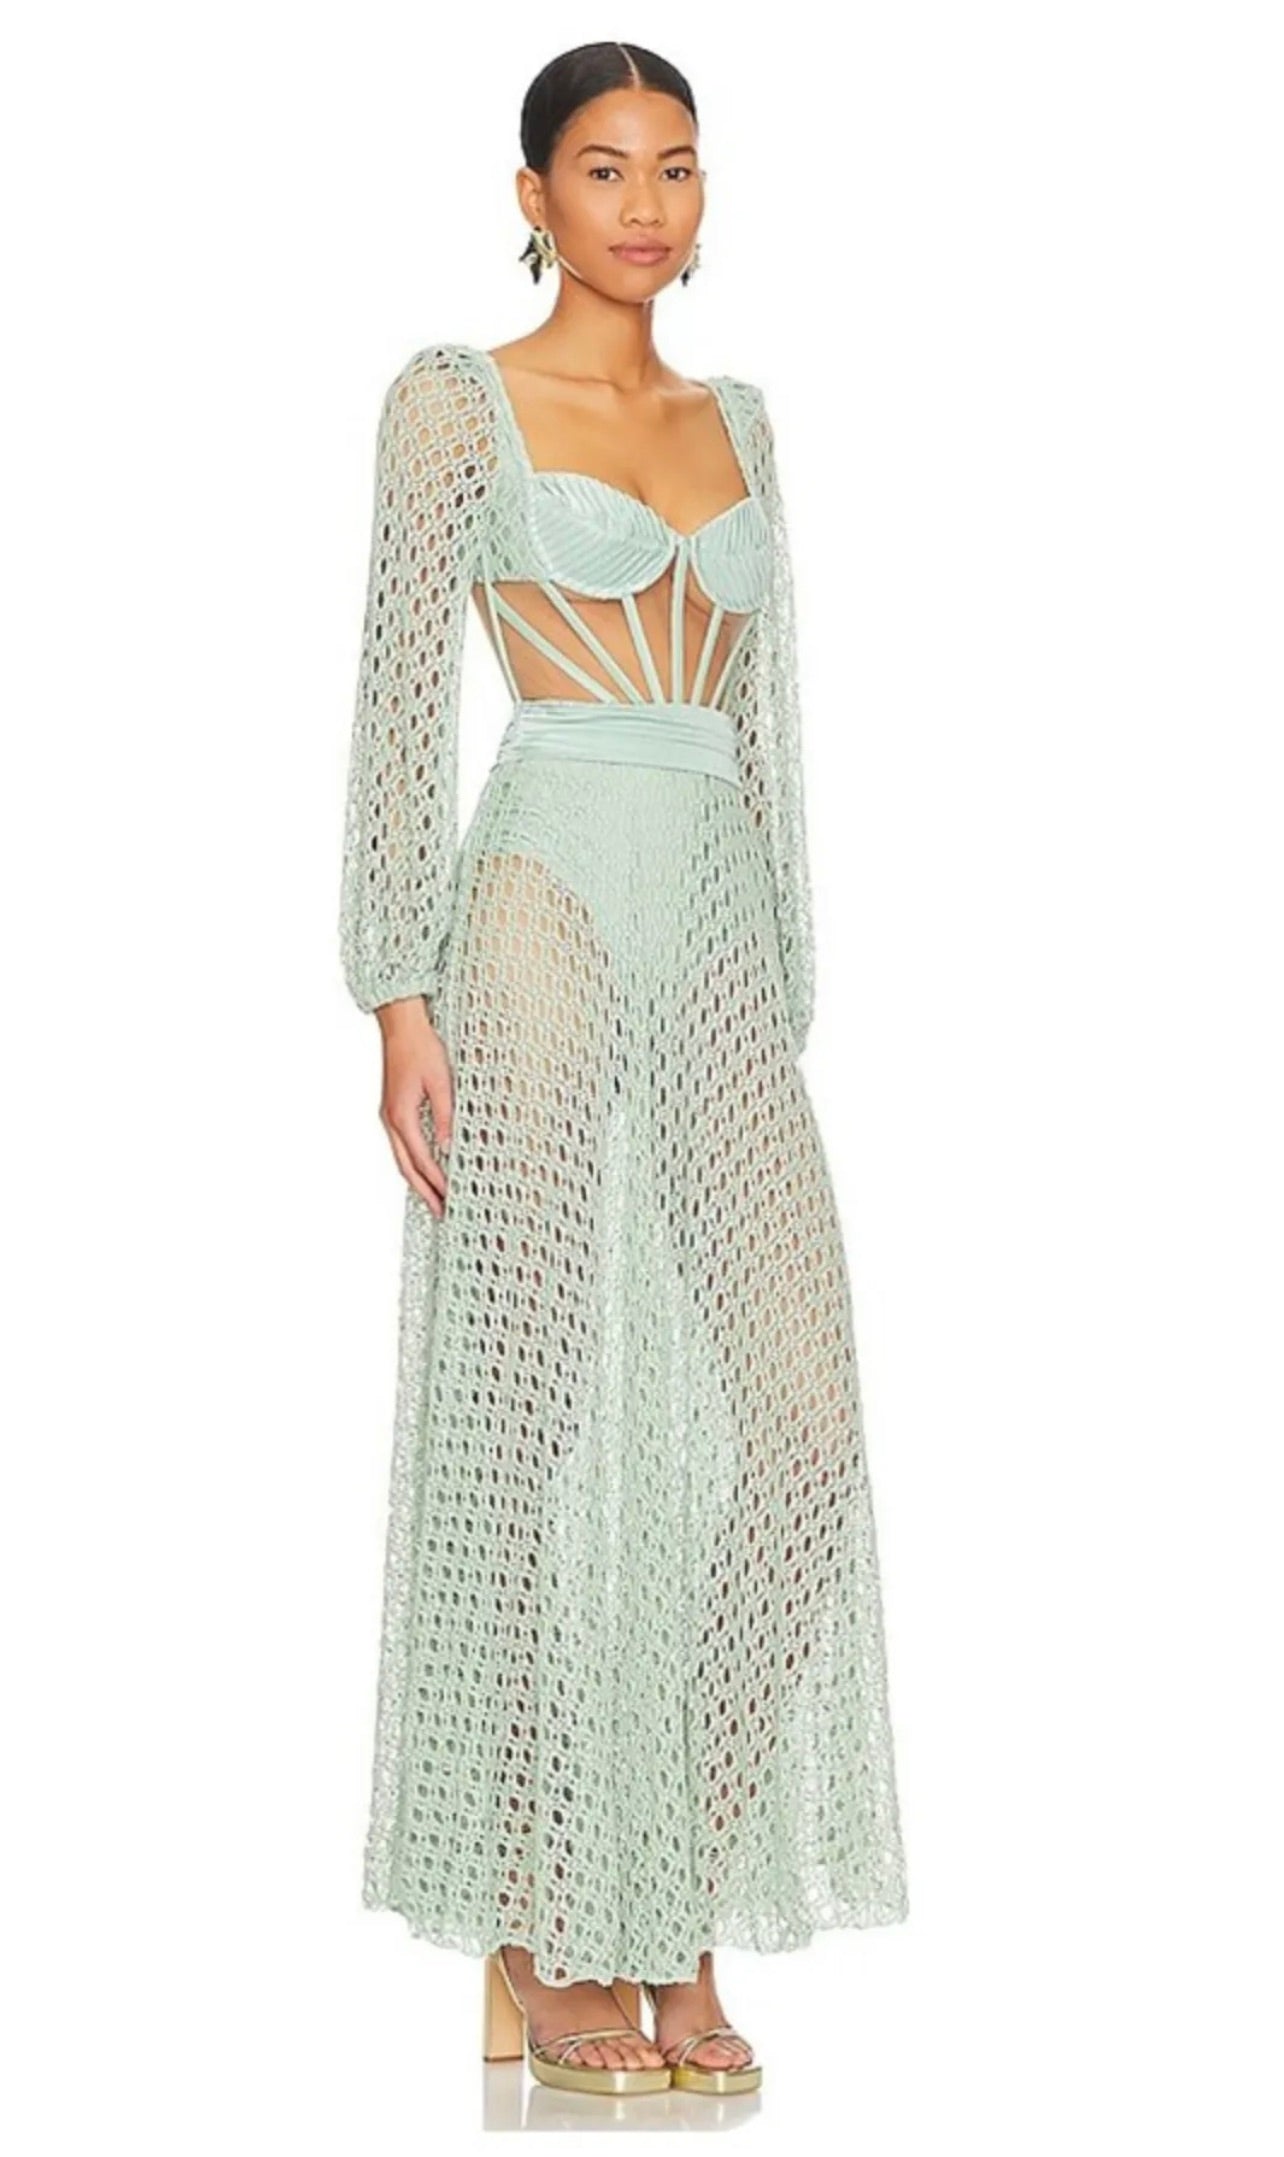 Turquoise Cutout Stretch and Crochet Knit Maxi Beach Dress - ALLE Handbags